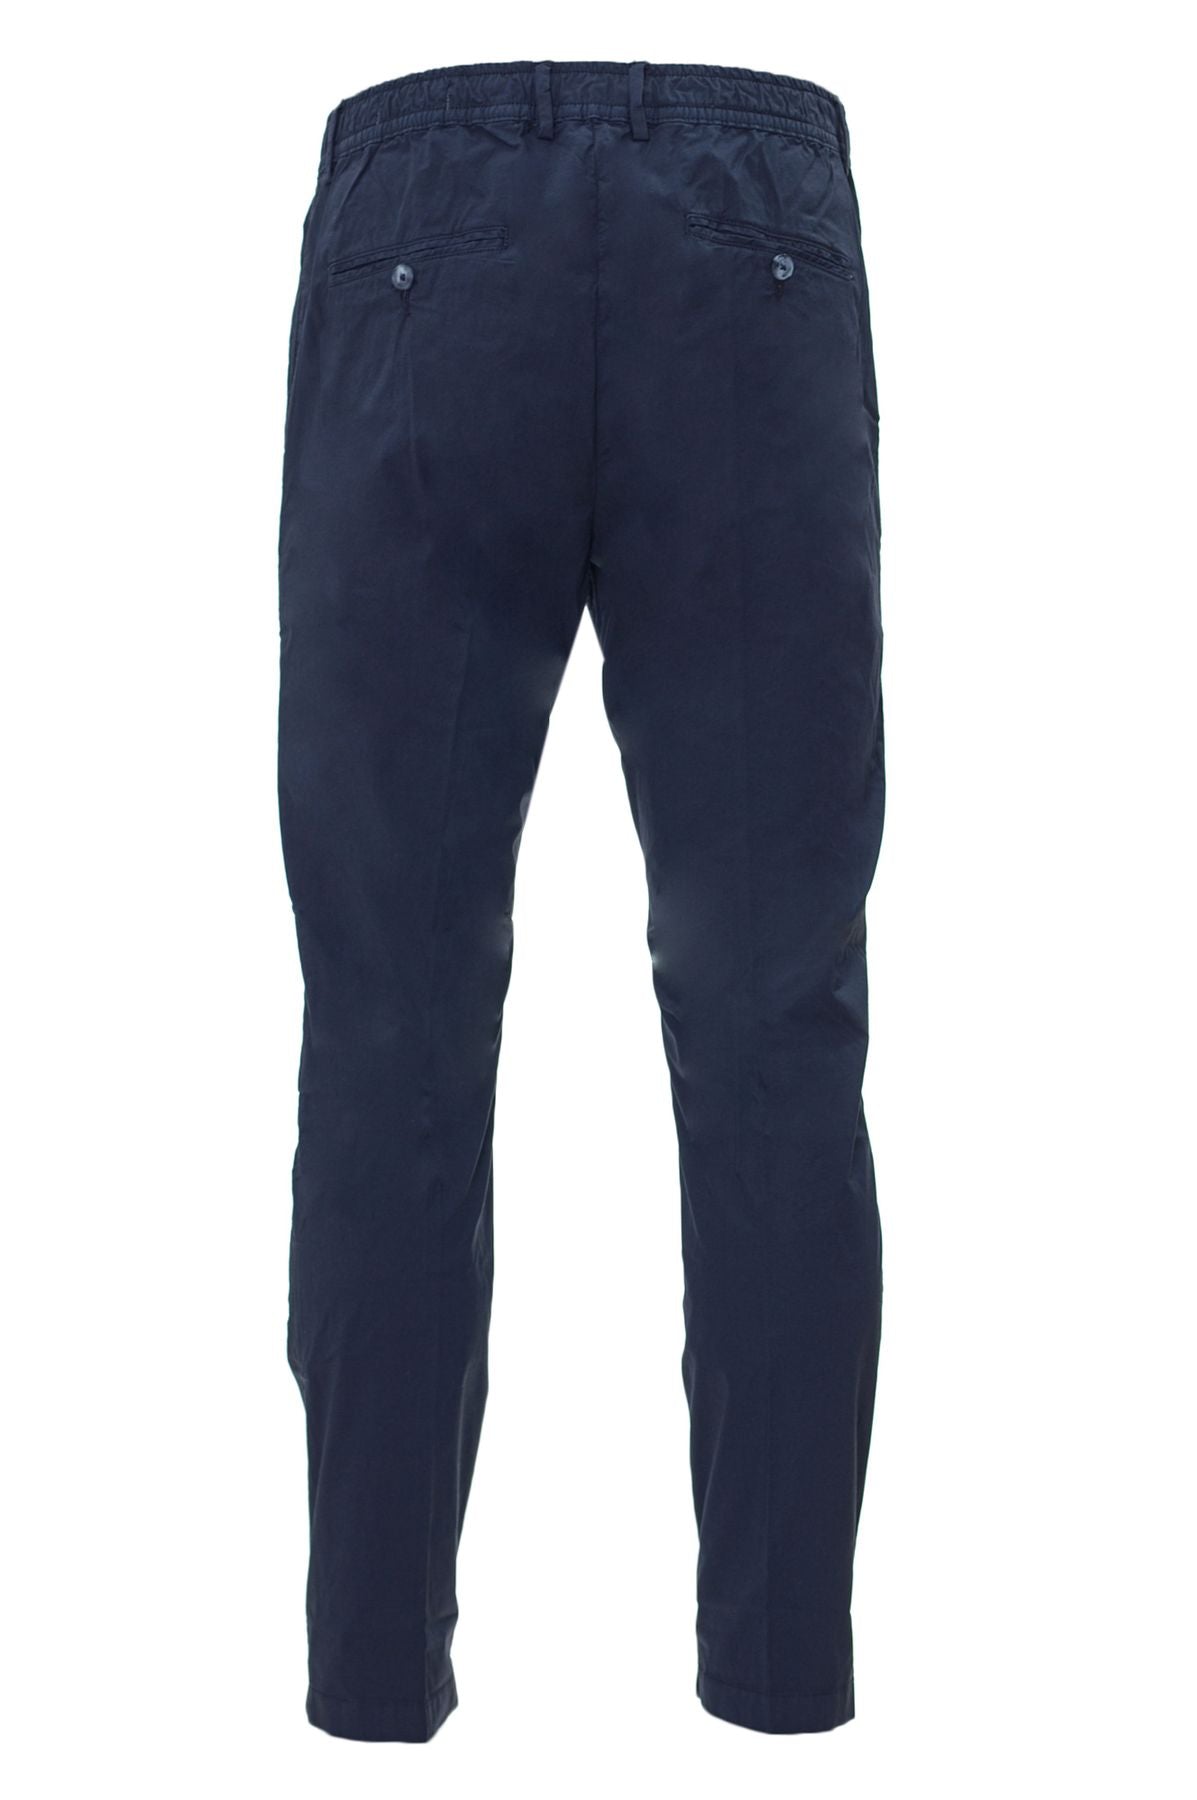 CRUNA Spring/Summer Cotton Trousers